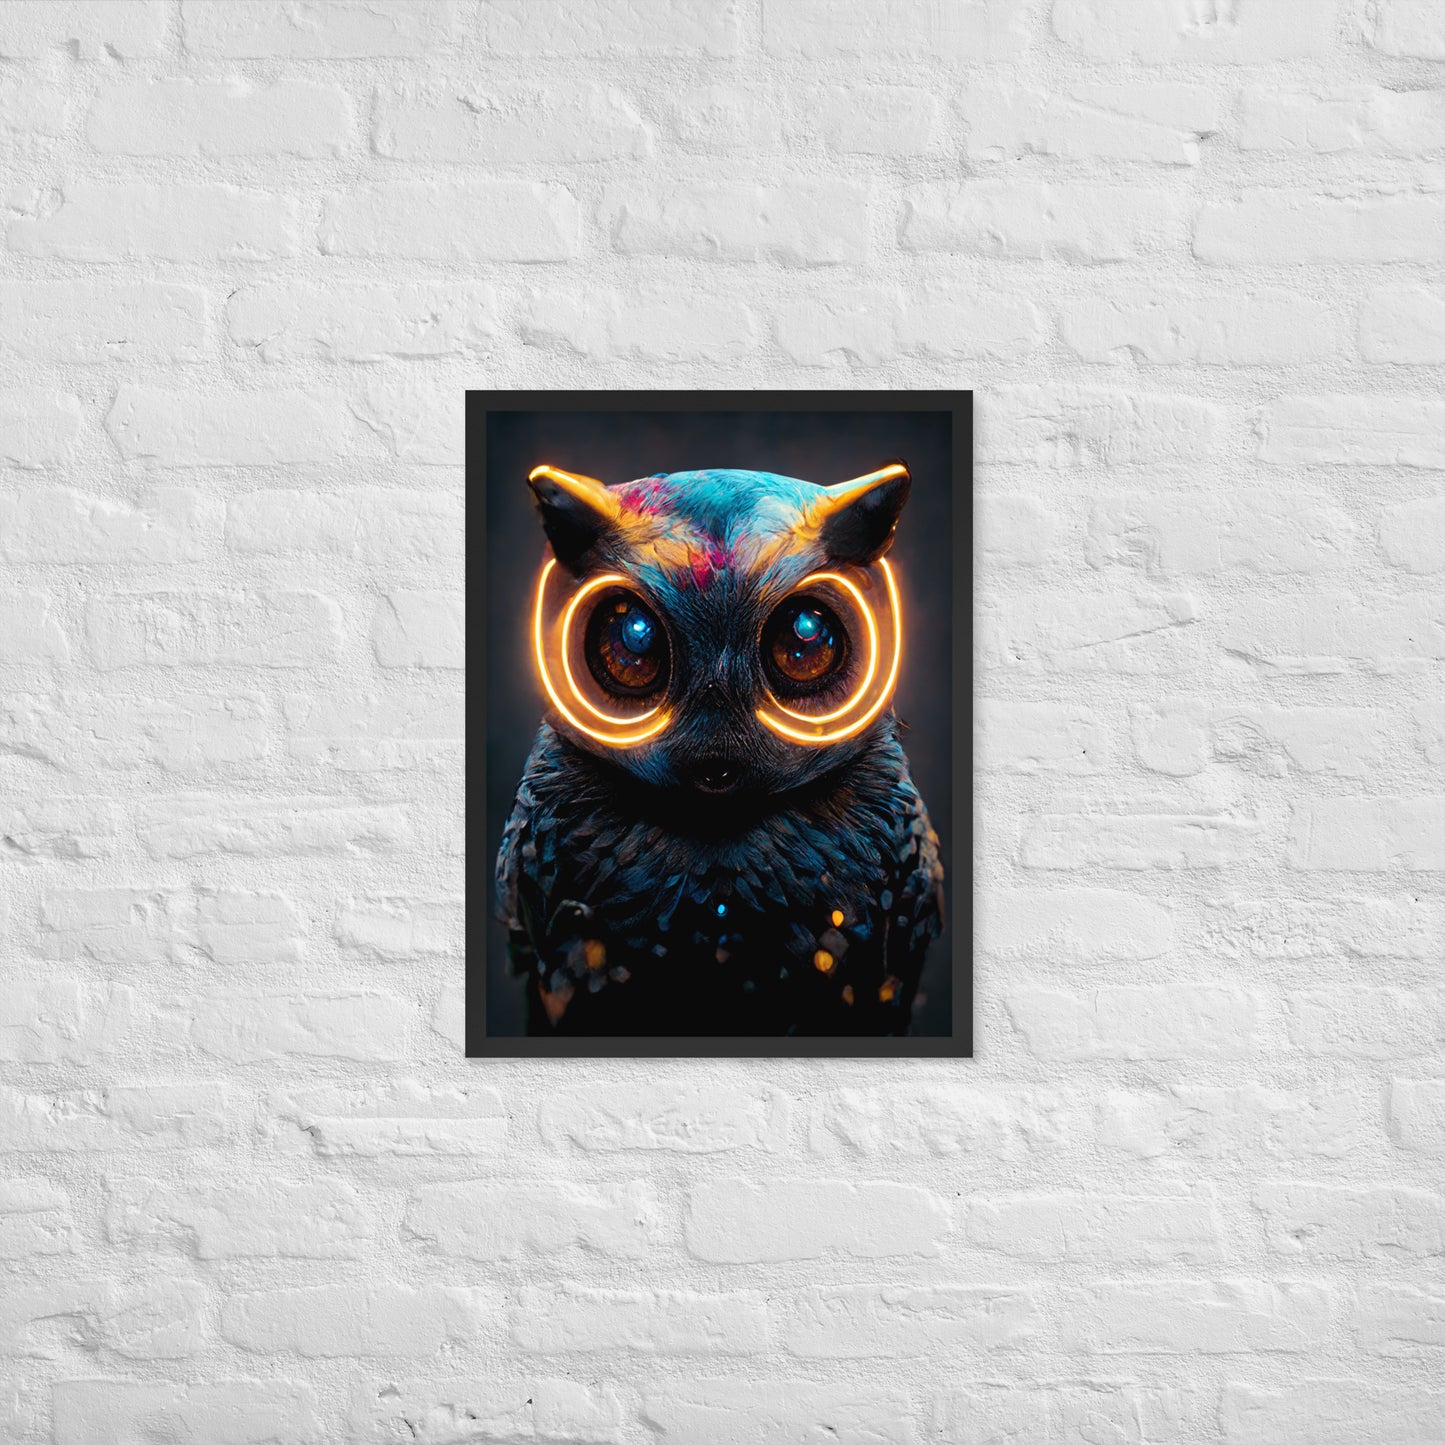 Electro Owl 1.0 Framed Photo Paper Poster